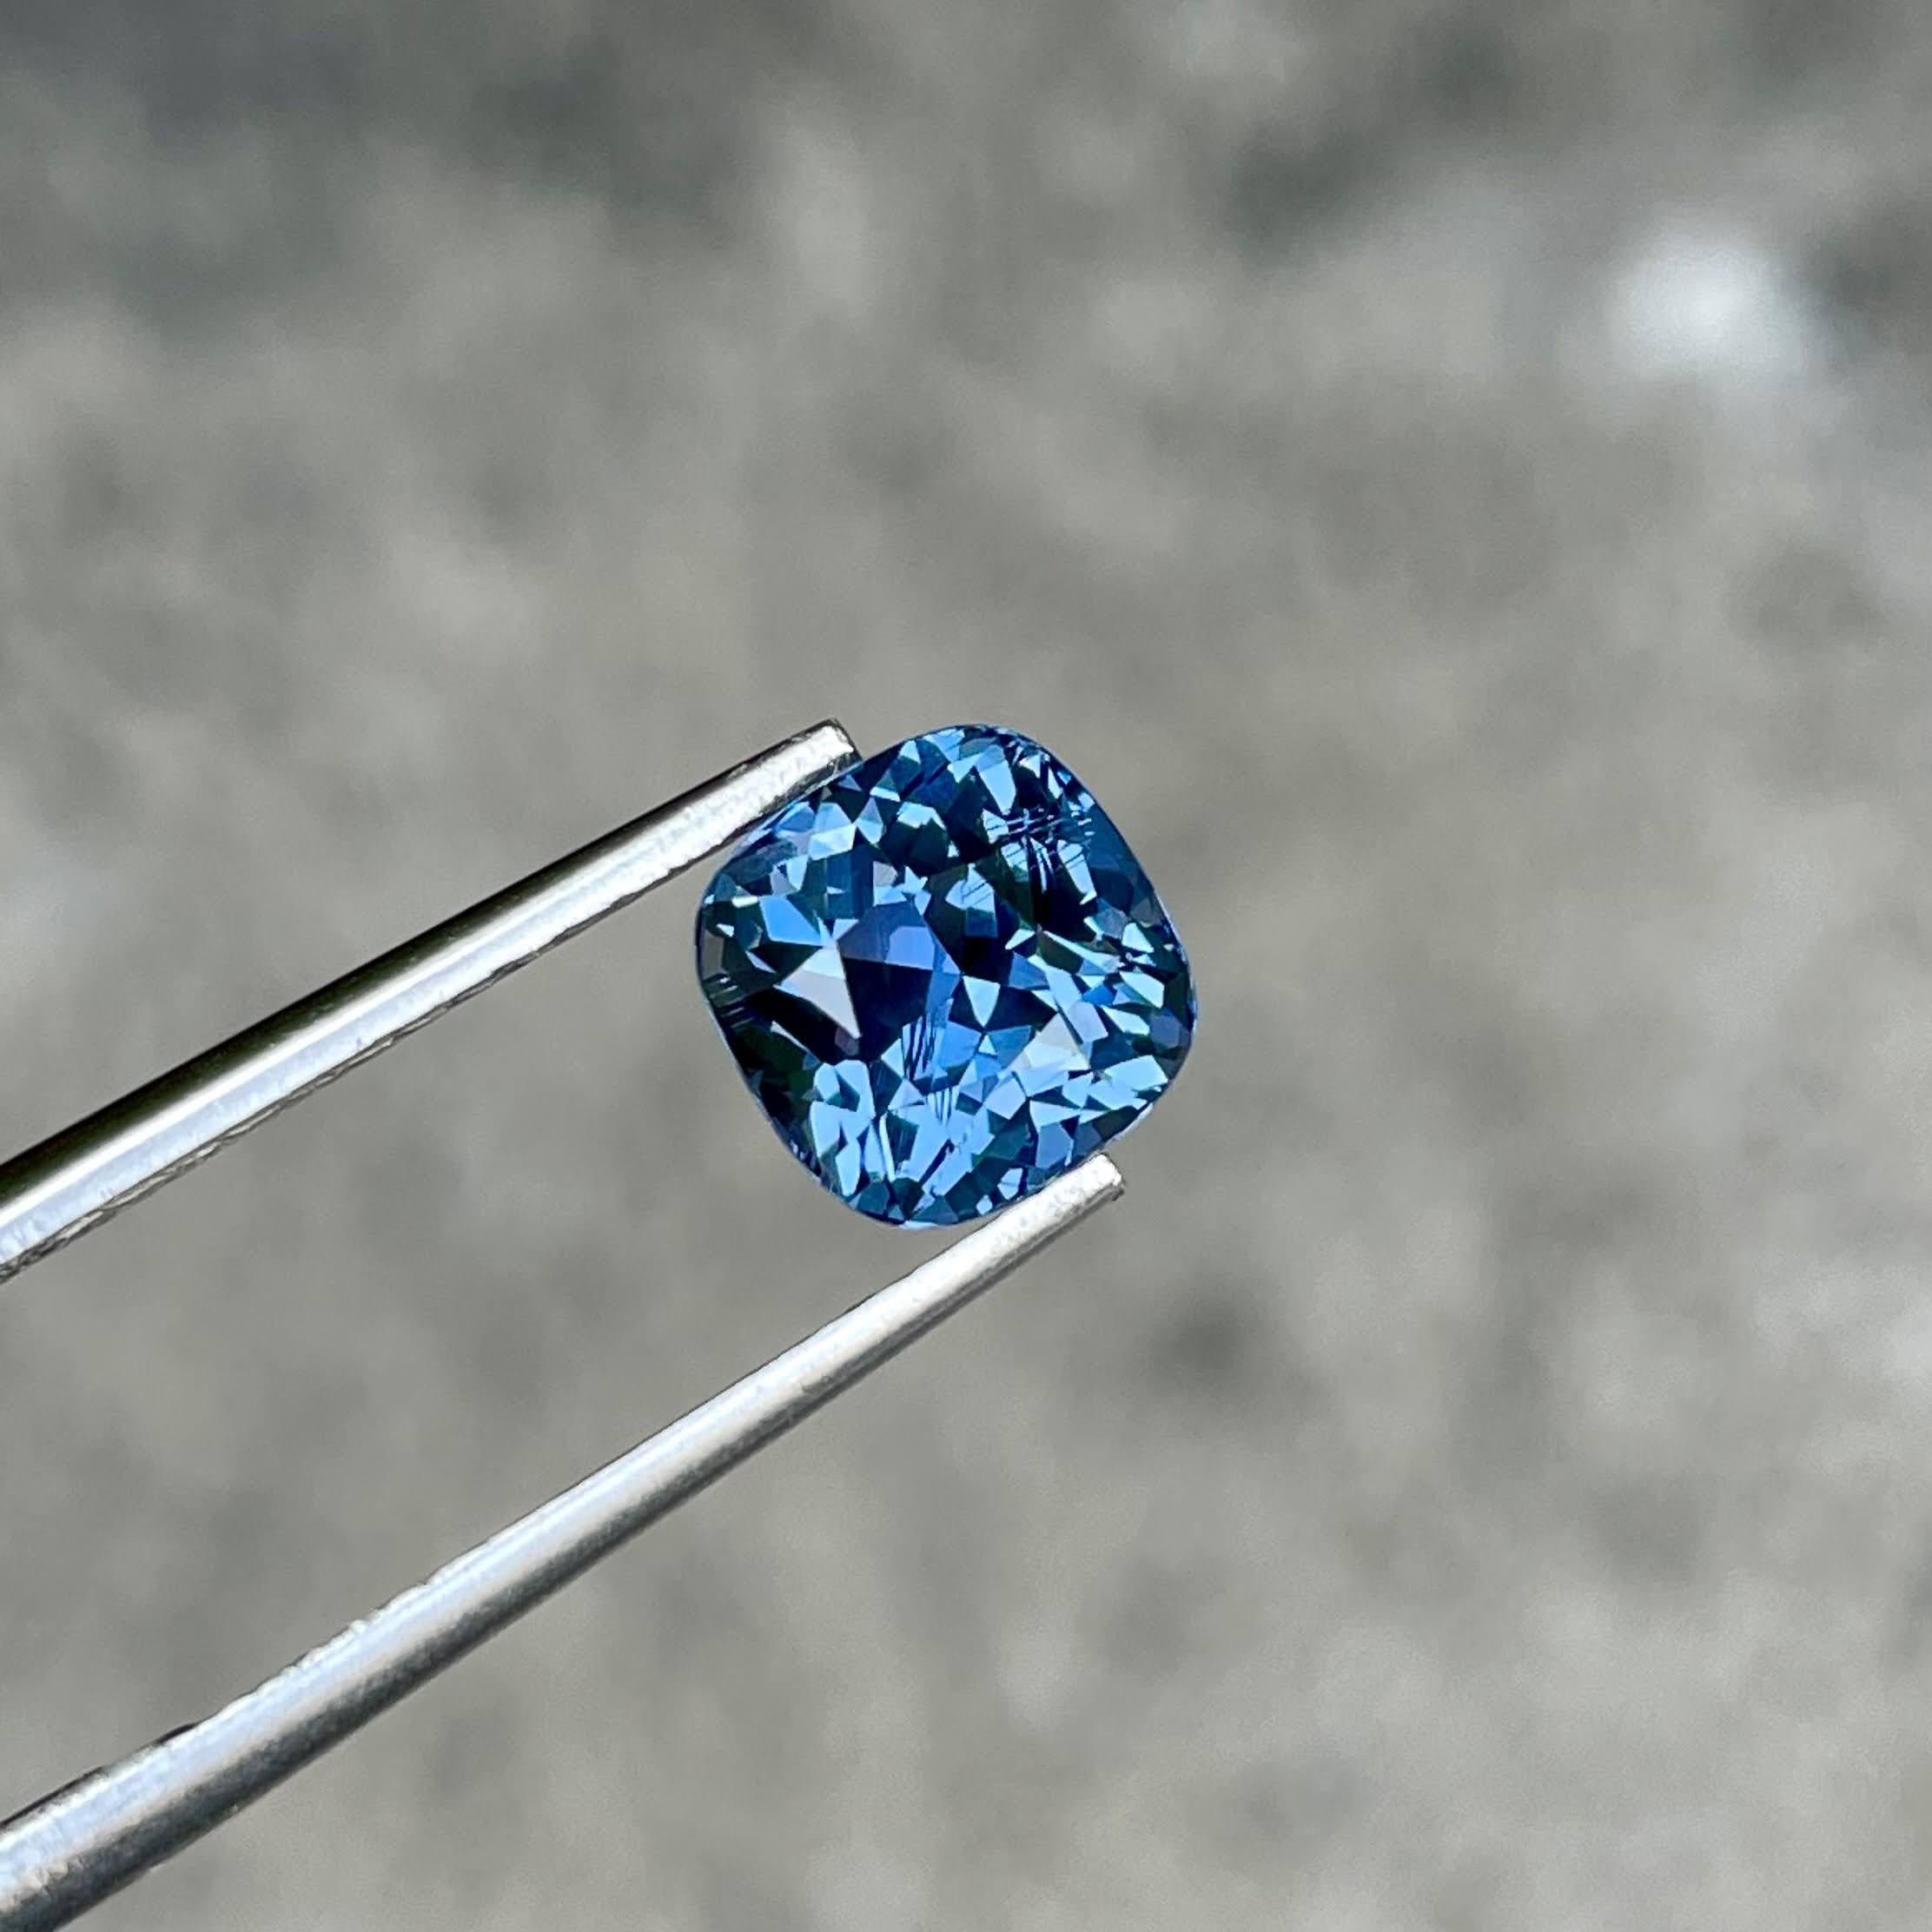 Weight 2.50 carats 
Dimensions 7.32x7.20x5.71 mm
Treatment none 
Origin Tanzania
Clarity VVS
Shape cushion 
Cut fancy cushion 




The 2.50 carats Violetish Blue Spinel Stone showcases the exquisite beauty of Tanzanian gemstones with its captivating